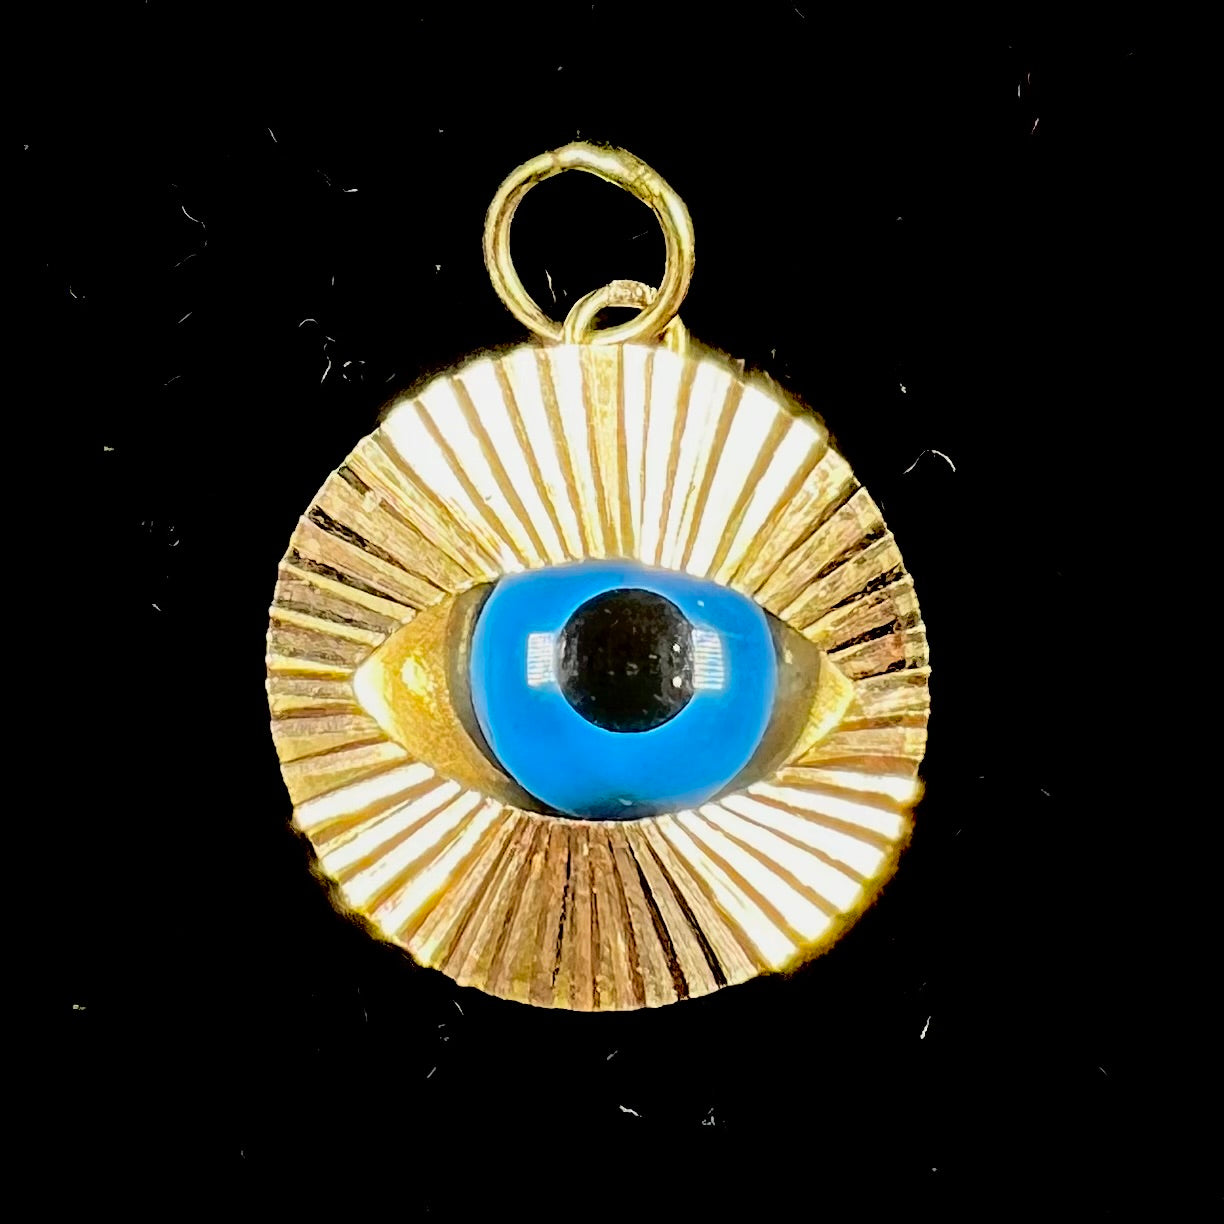 An 18kt yellow gold all-seeing eye pendant with a moving glass eye.